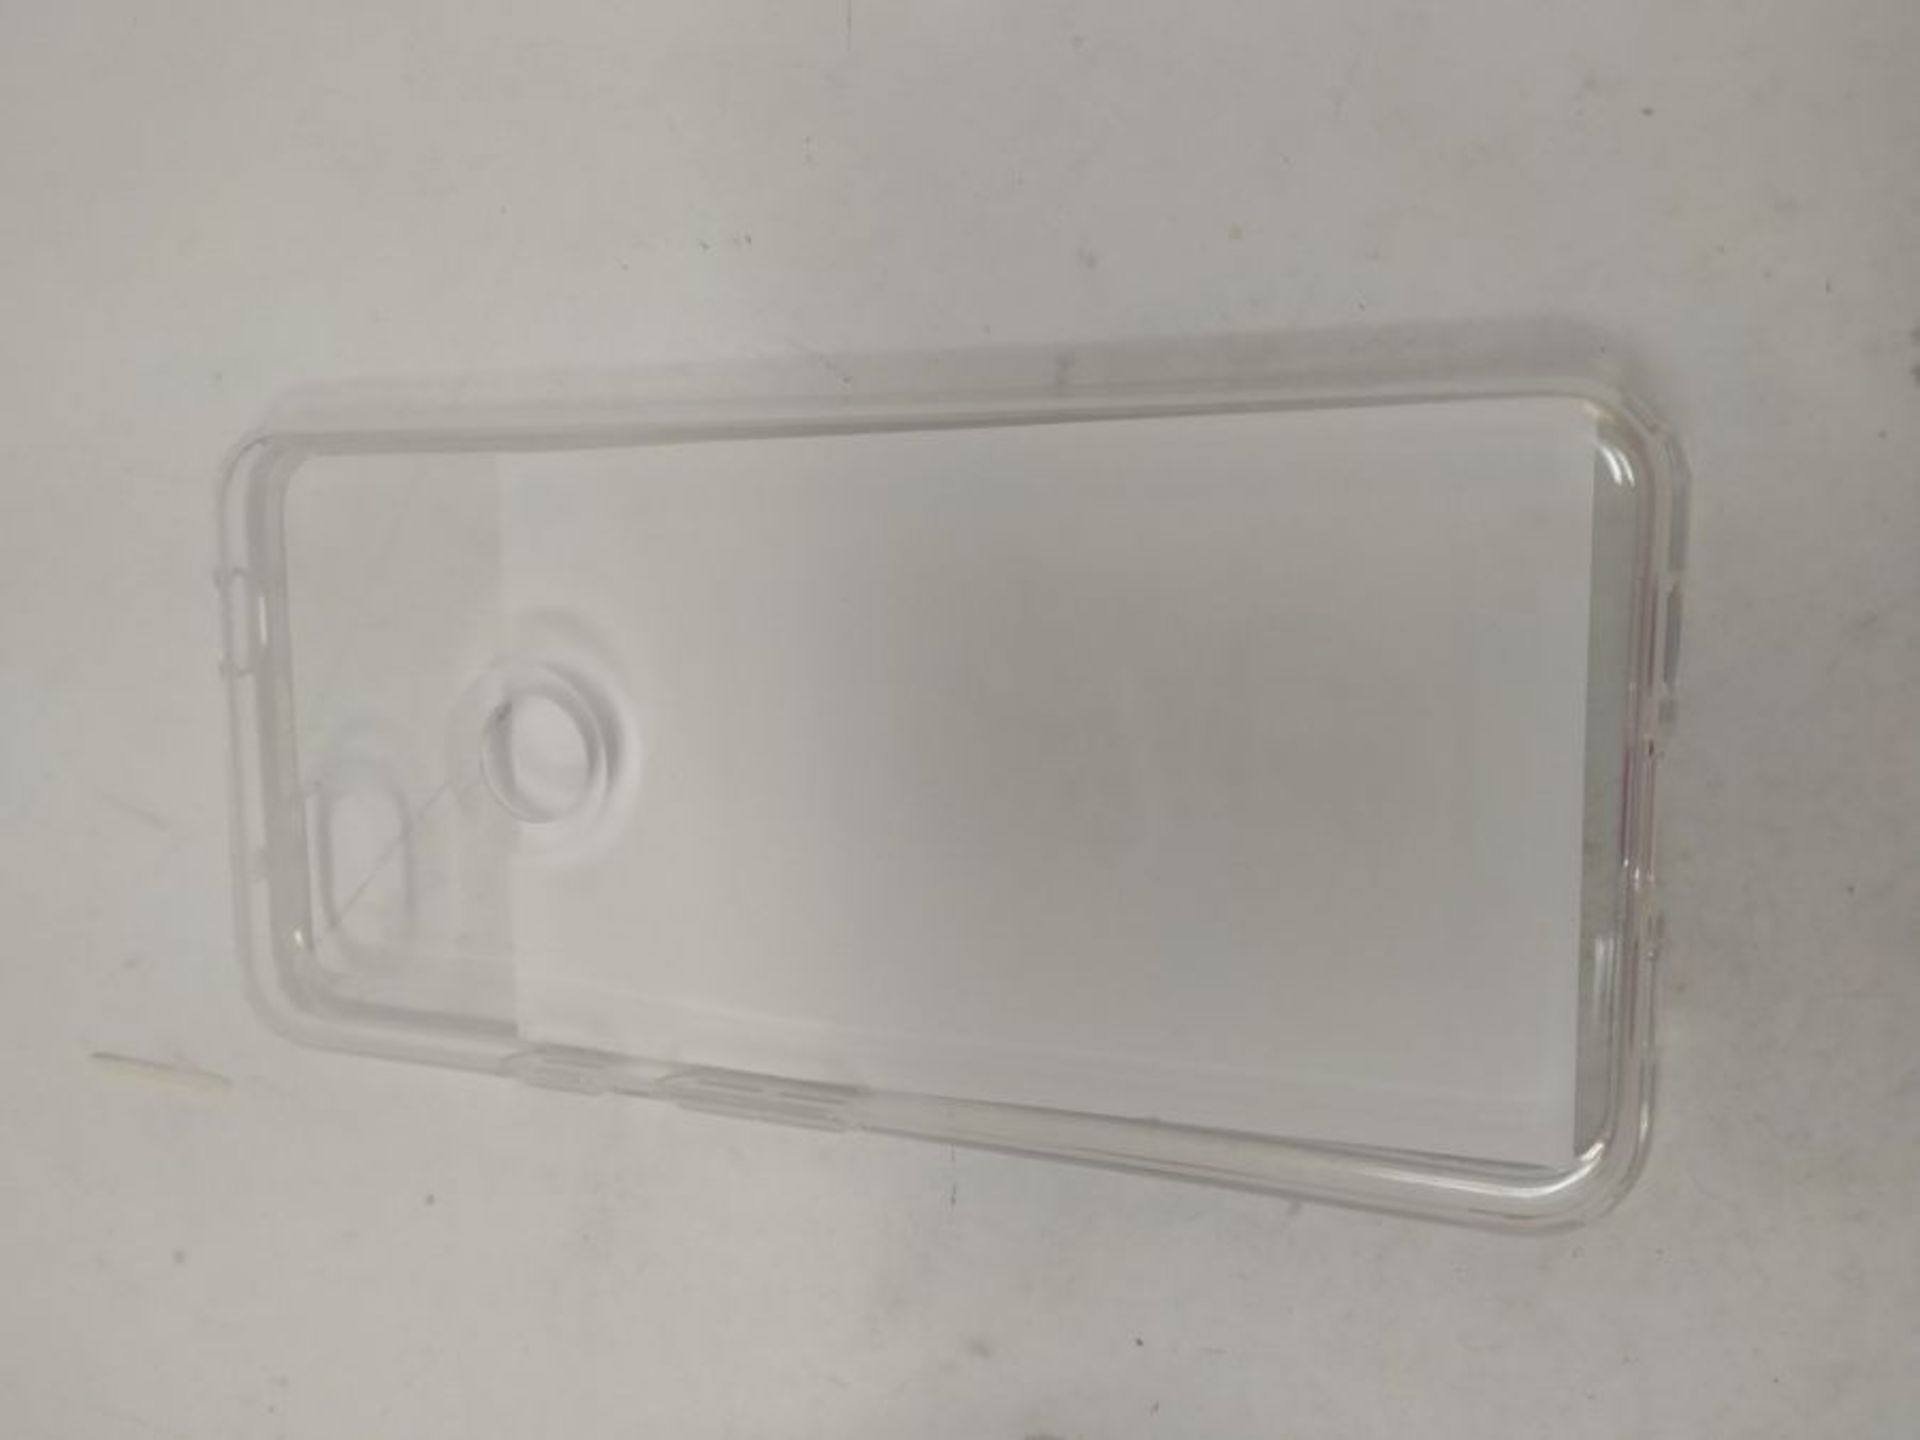 Spigen Liquid Crystal Case Compatible with Pixel 3a (2019) - Crystal Clear - Image 2 of 2